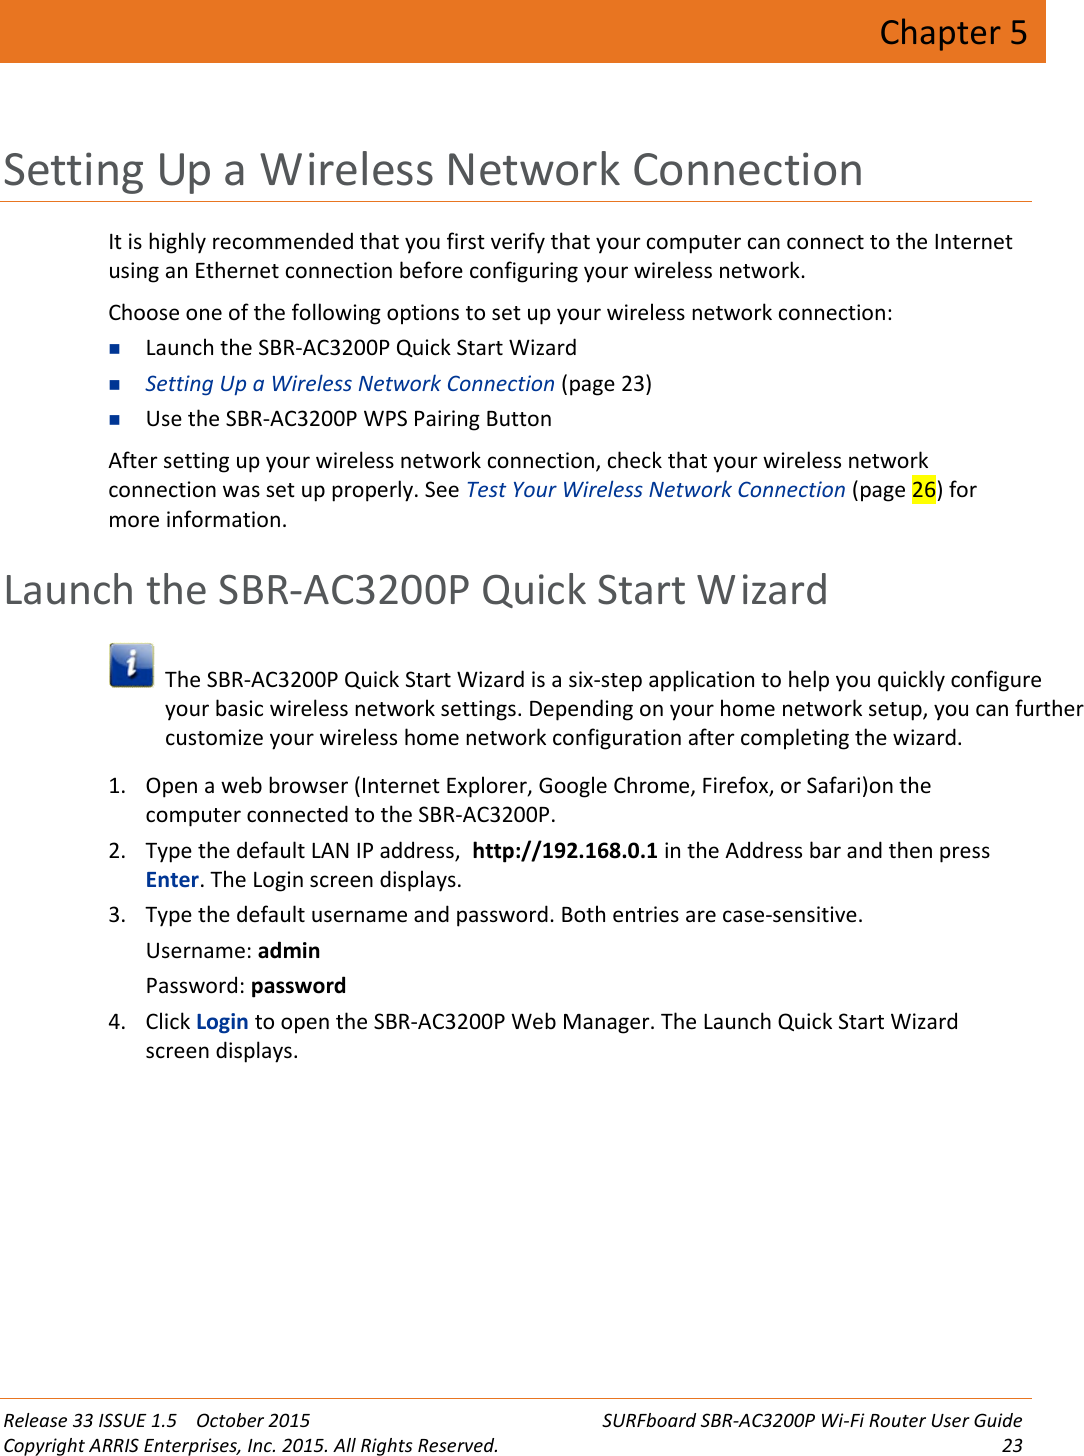 Release 33 ISSUE 1.5 October 2015 SURFboard SBR-AC3200P Wi-Fi Router User GuideCopyright ARRIS Enterprises, Inc. 2015. All Rights Reserved. 23Chapter 5Setting Up a Wireless Network ConnectionIt is highly recommended that you first verify that your computer can connect to the Internetusing an Ethernet connection before configuring your wireless network.Choose one of the following options to set up your wireless network connection:Launch the SBR-AC3200P Quick Start WizardSetting Up a Wireless Network Connection (page 23)Use the SBR-AC3200P WPS Pairing ButtonAfter setting up your wireless network connection, check that your wireless networkconnection was set up properly. See Test Your Wireless Network Connection (page 26) formore information.Launch the SBR-AC3200P Quick Start WizardThe SBR-AC3200P Quick Start Wizard is a six-step application to help you quickly configureyour basic wireless network settings. Depending on your home network setup, you can furthercustomize your wireless home network configuration after completing the wizard.1. Open a web browser (Internet Explorer, Google Chrome, Firefox, or Safari)on thecomputer connected to the SBR-AC3200P.2. Type the default LAN IP address, http://192.168.0.1 in the Address bar and then pressEnter. The Login screen displays.3. Type the default username and password. Both entries are case-sensitive.Username: adminPassword: password4. Click Login to open the SBR-AC3200P Web Manager. The Launch Quick Start Wizardscreen displays.